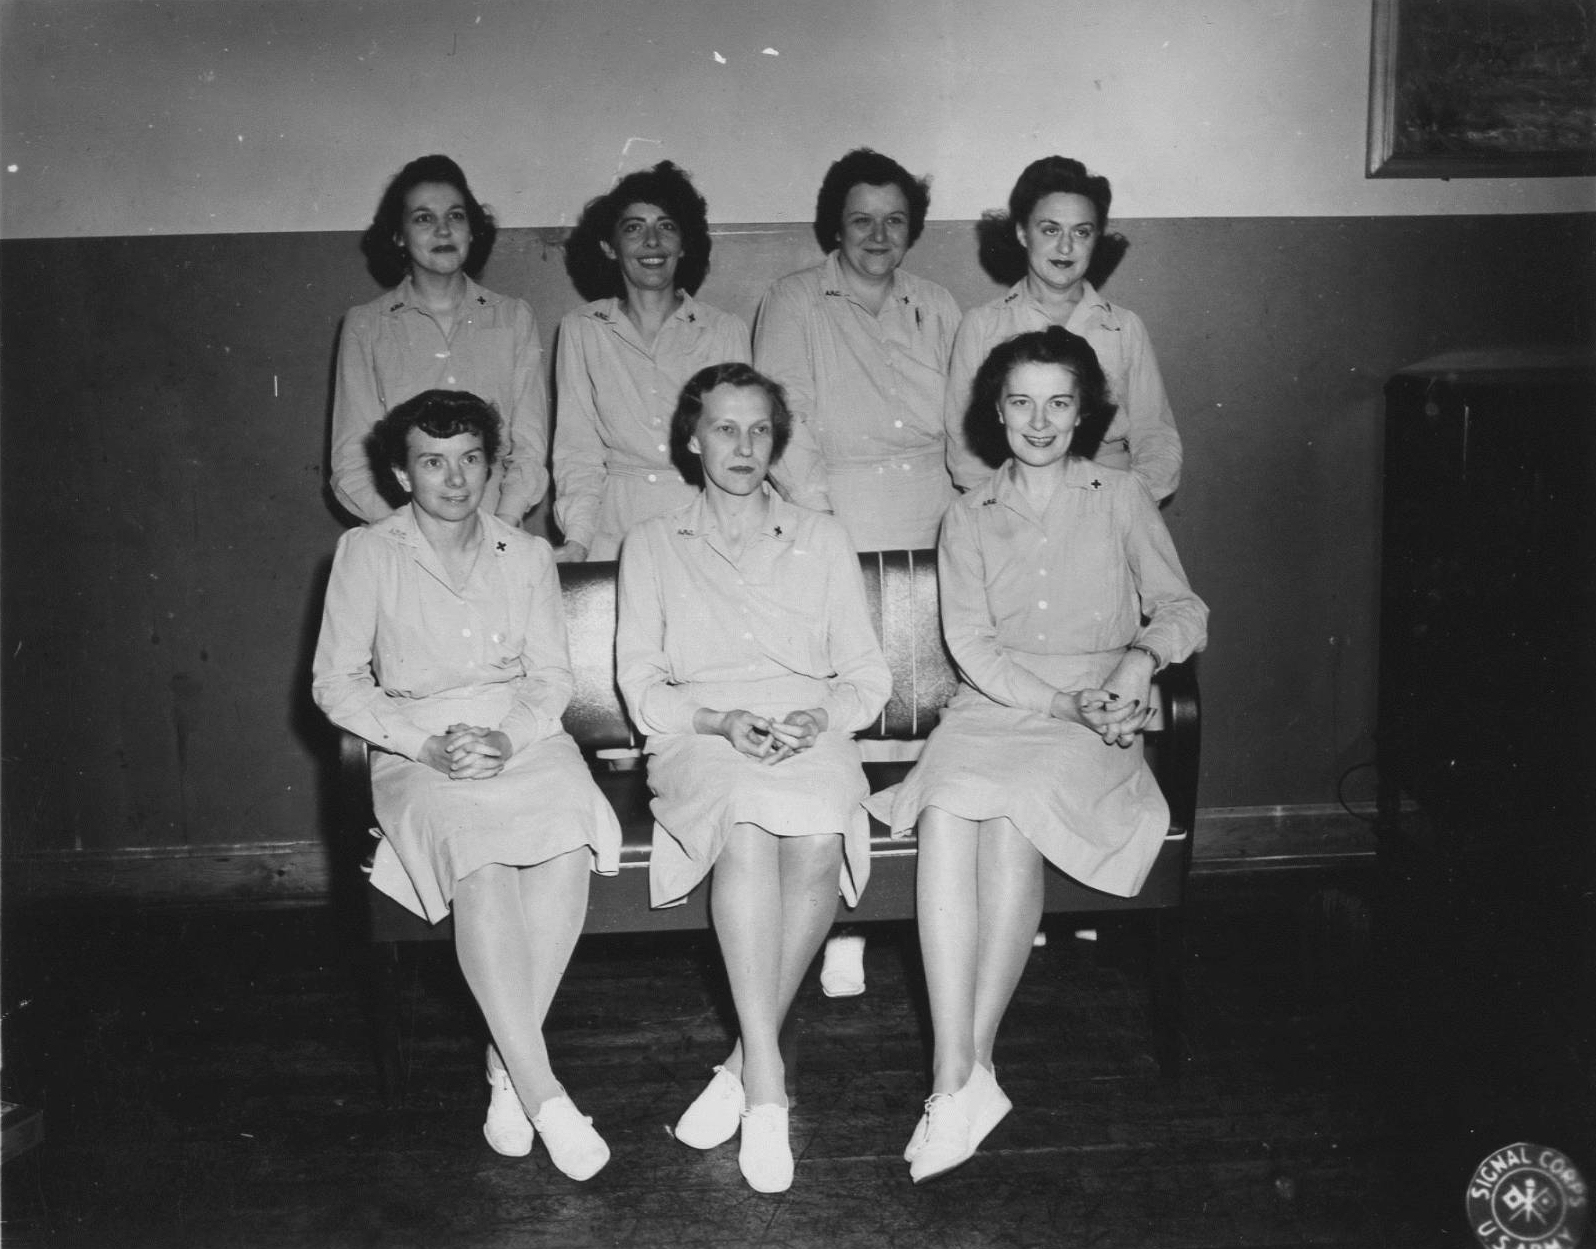 Red Cross Workers at Camp Atterbury, Indiana